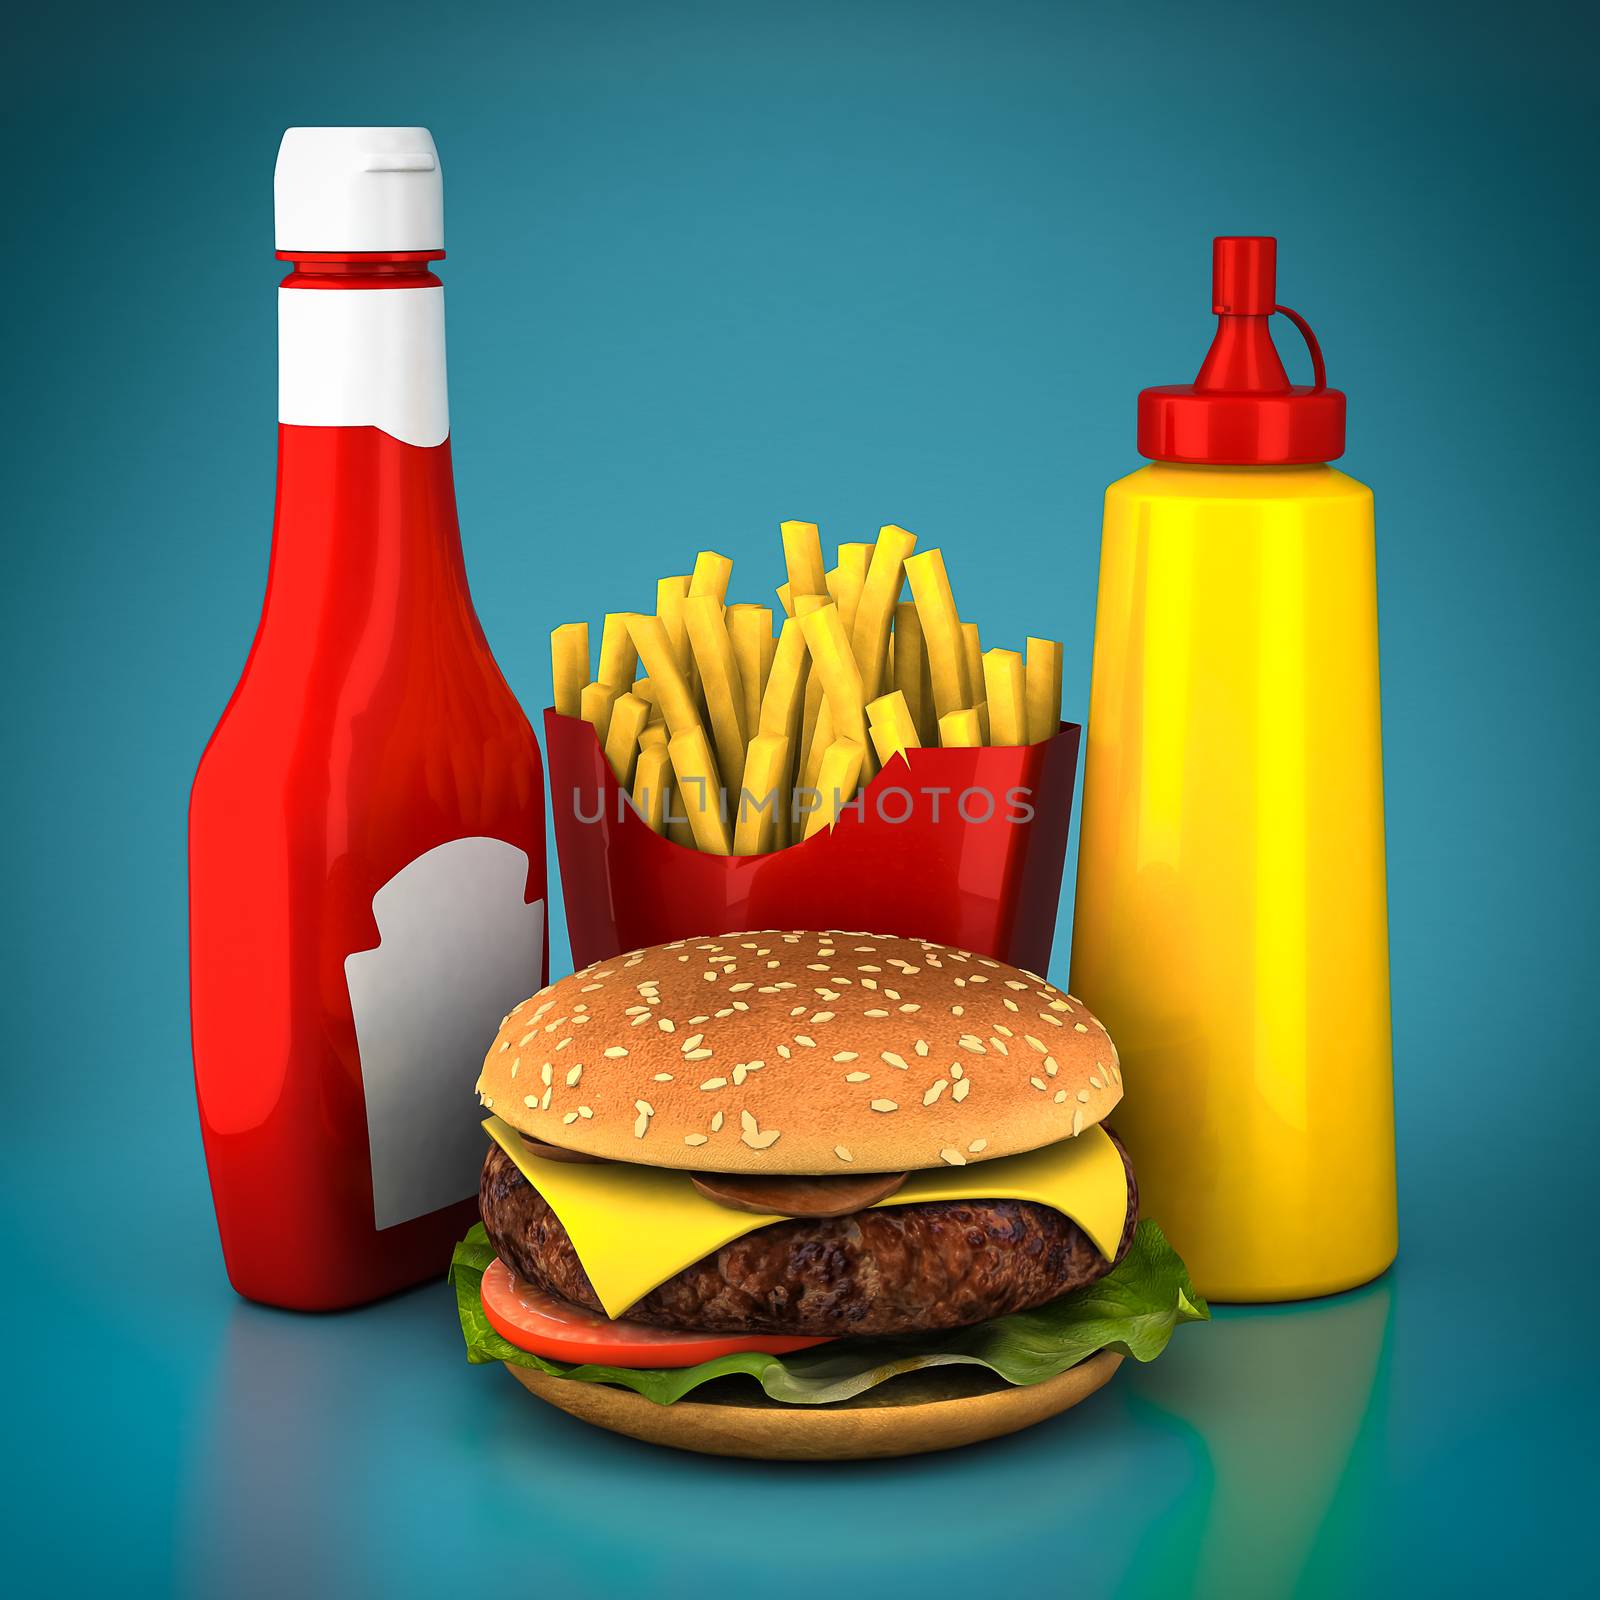 Hamburger, french fries, mustard and ketchup on a blue background